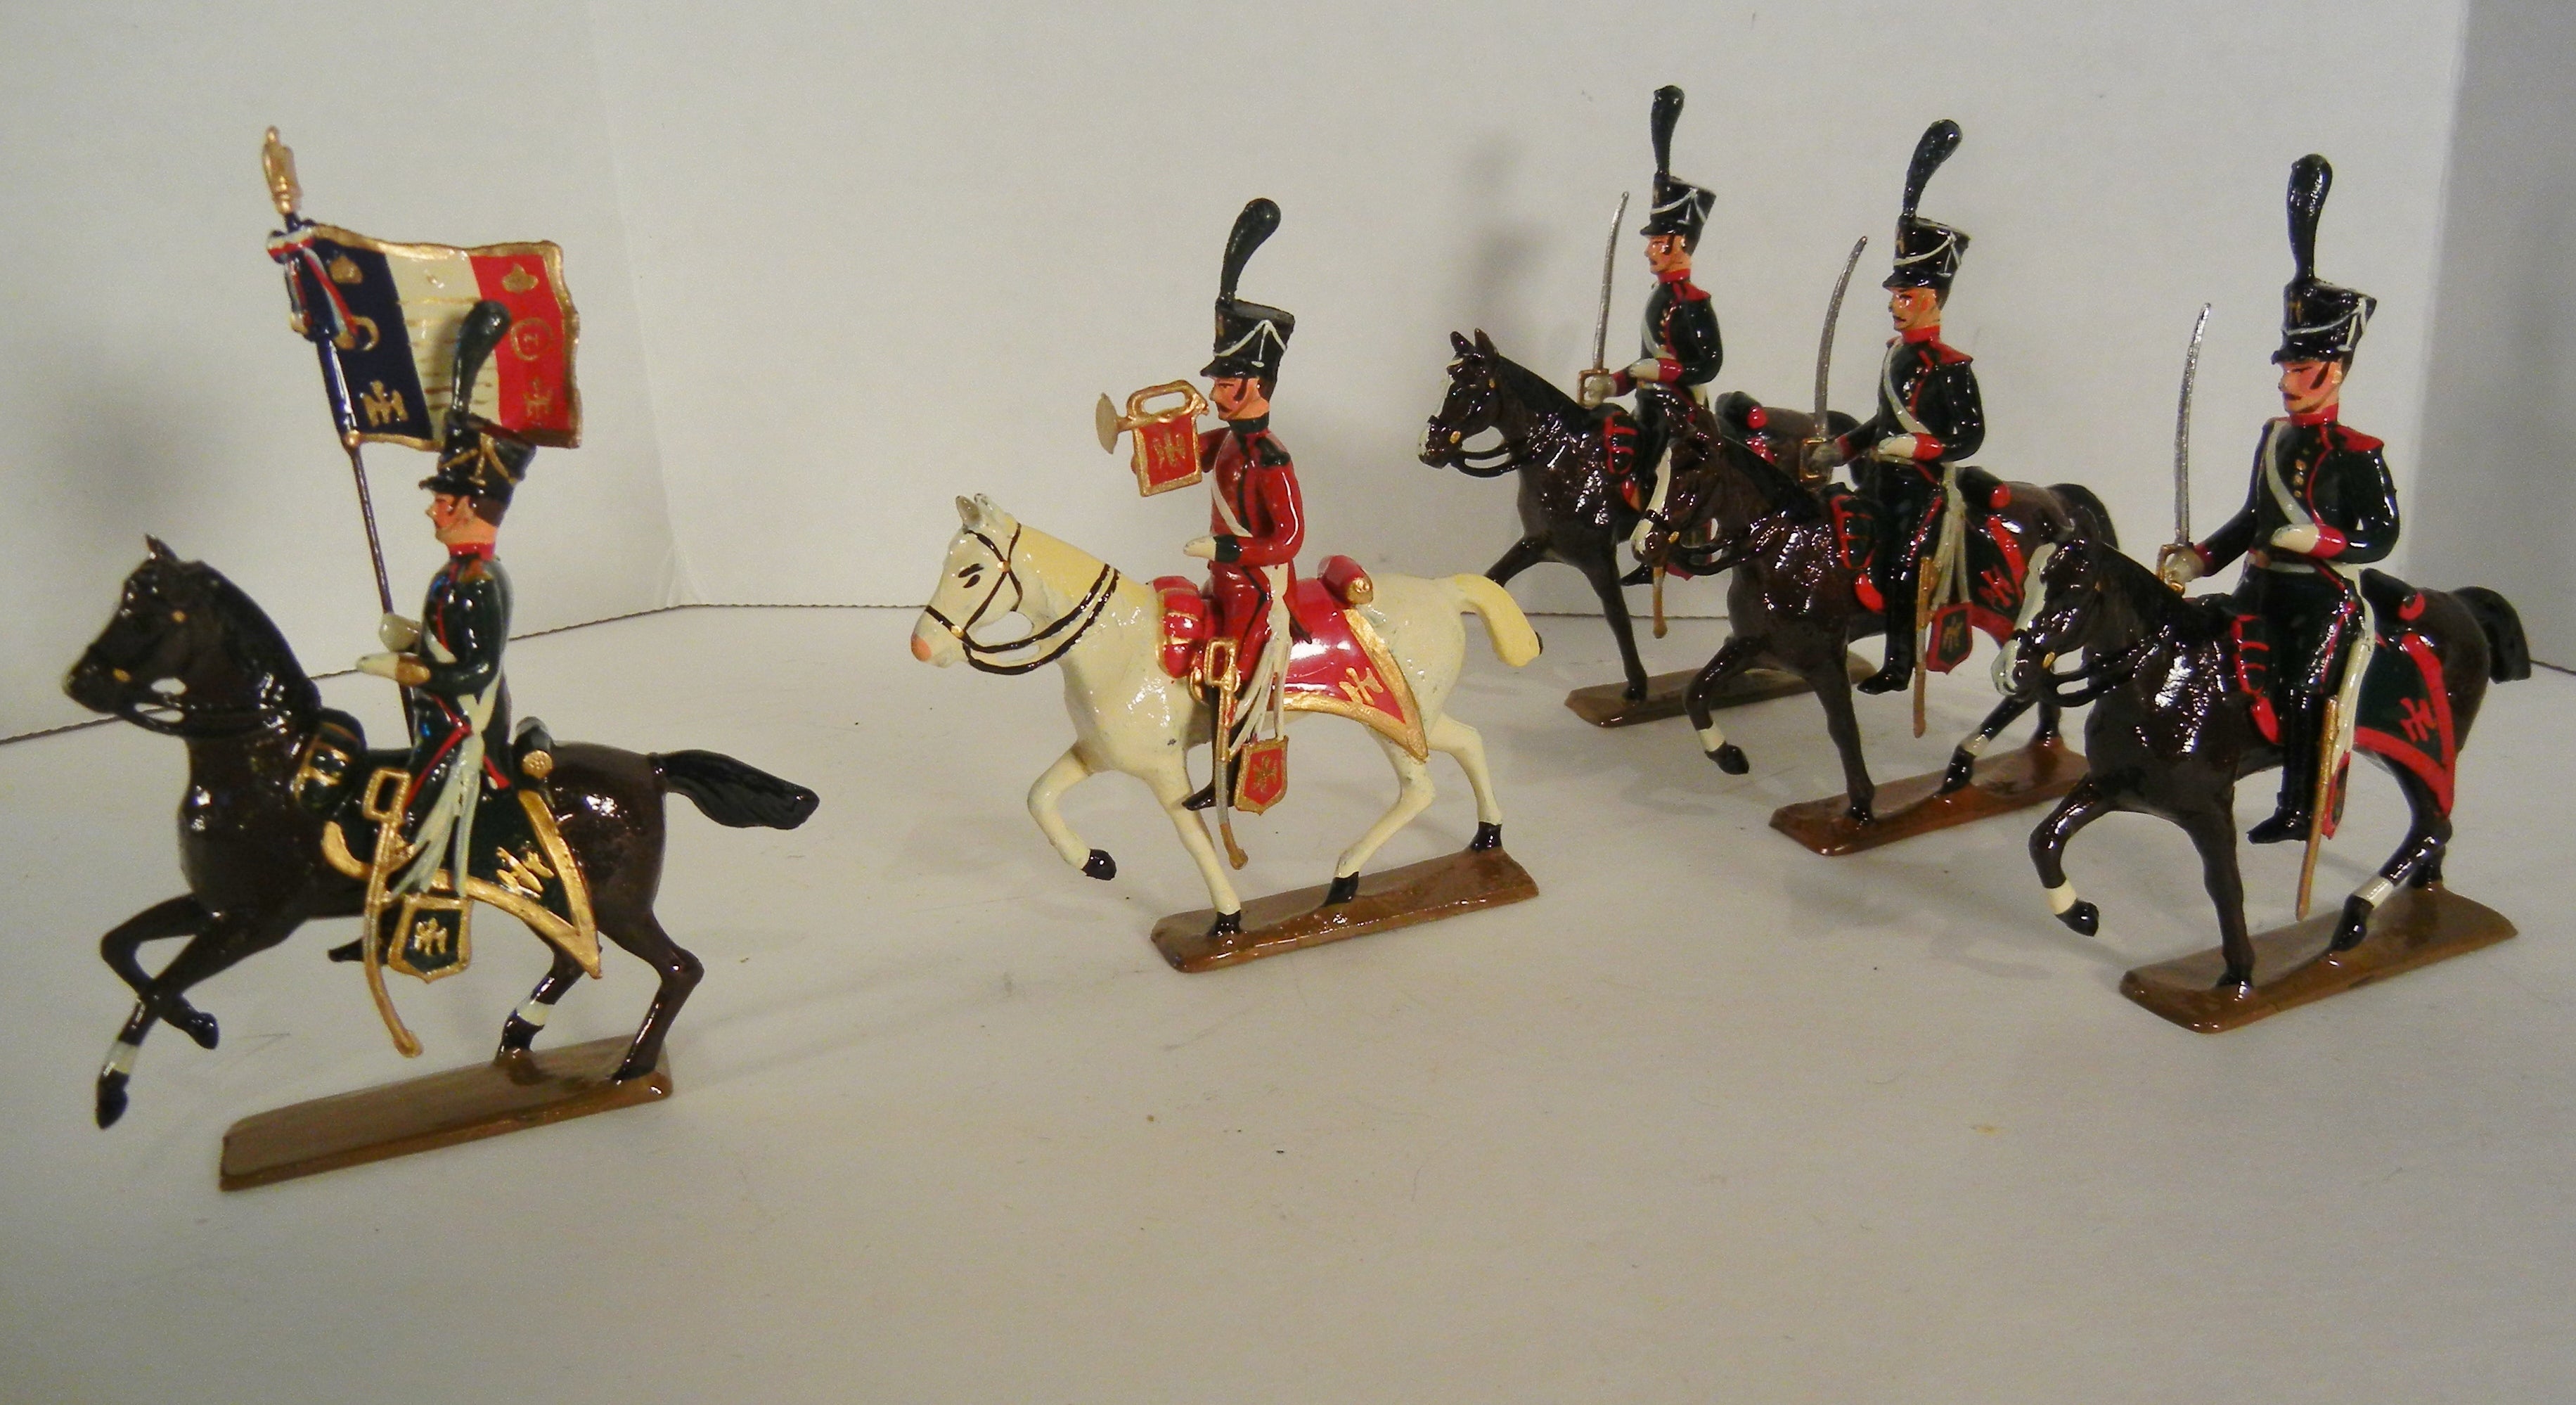 Chasseurs of 1809 (Light Cavalry) Vintage Napoleonic Toy Soldiers by Mignot